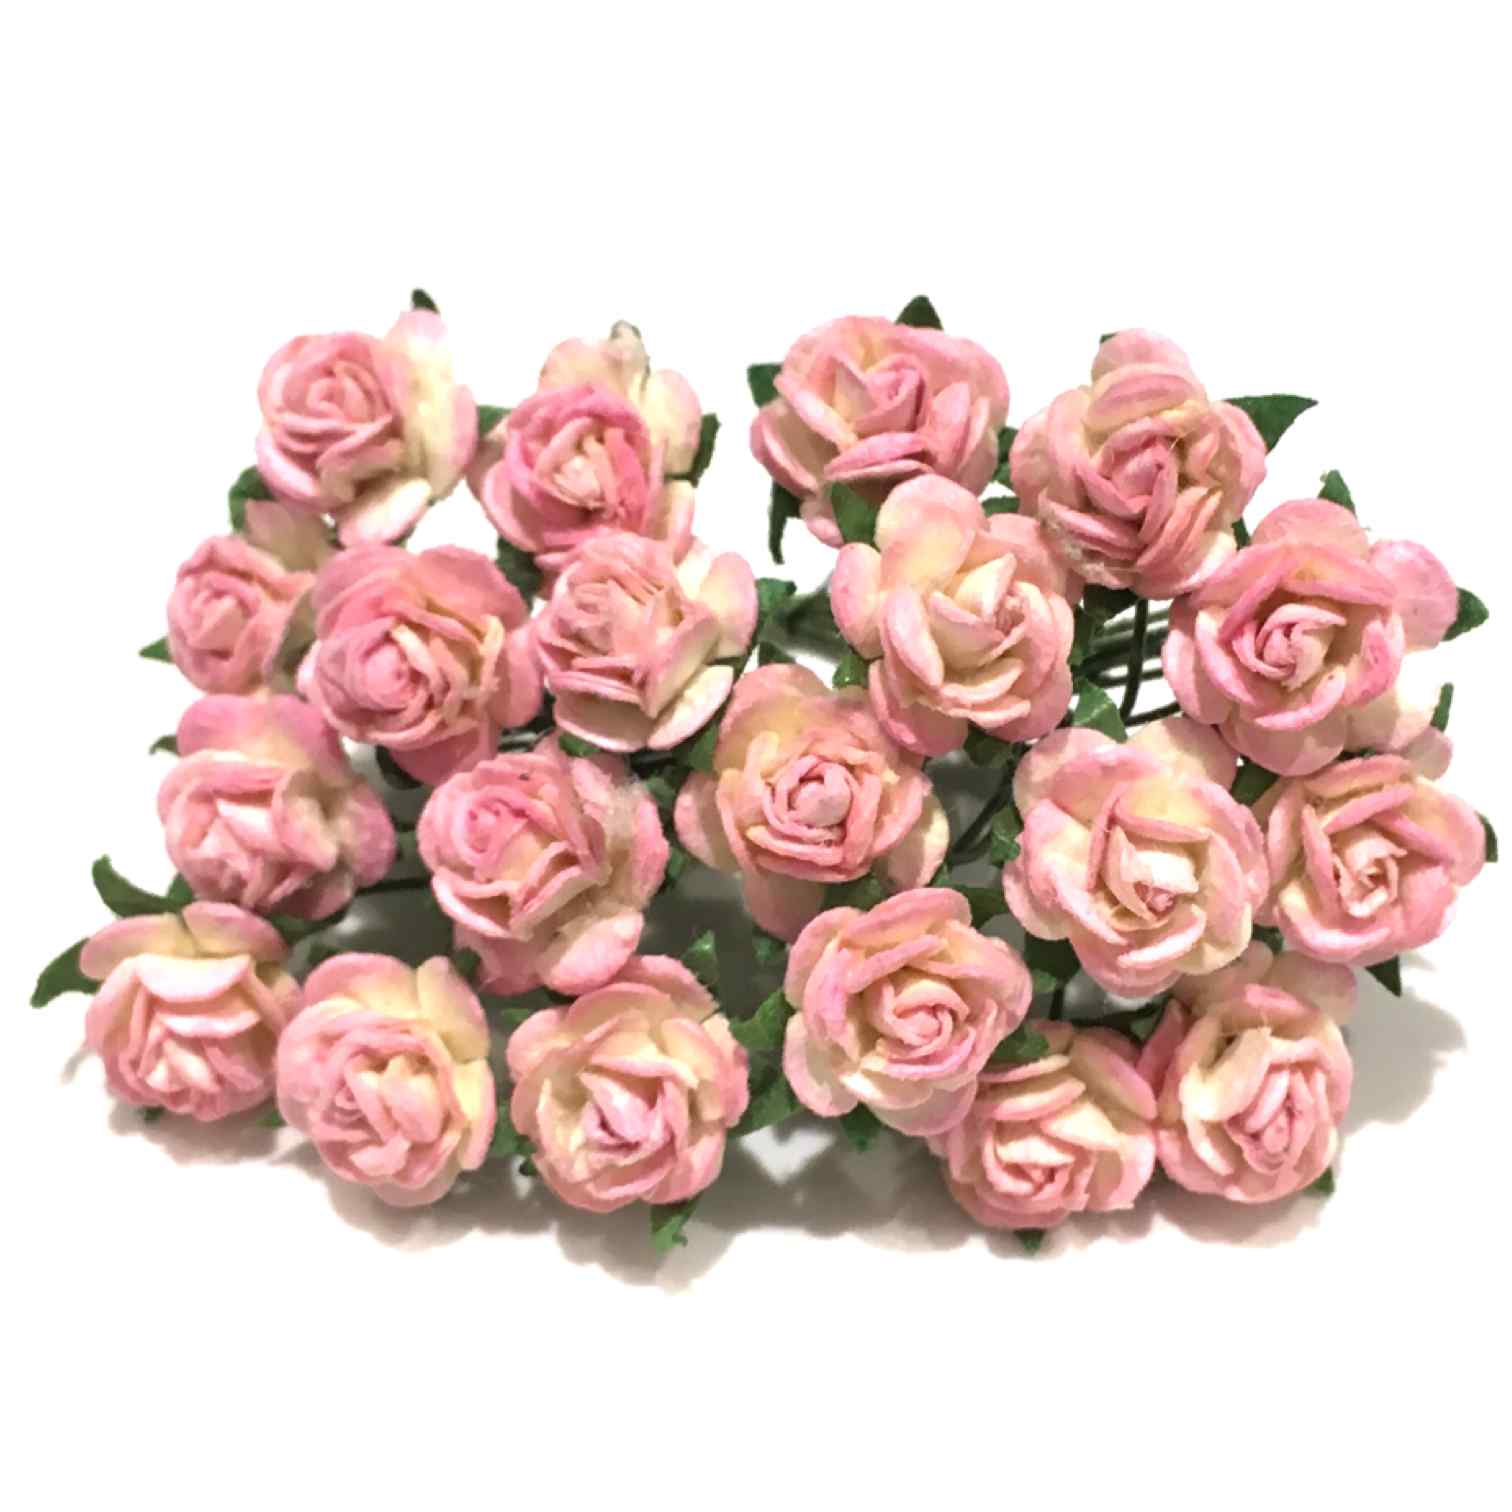 Pale Pink And Cream Open Mulberry Paper Roses Or021